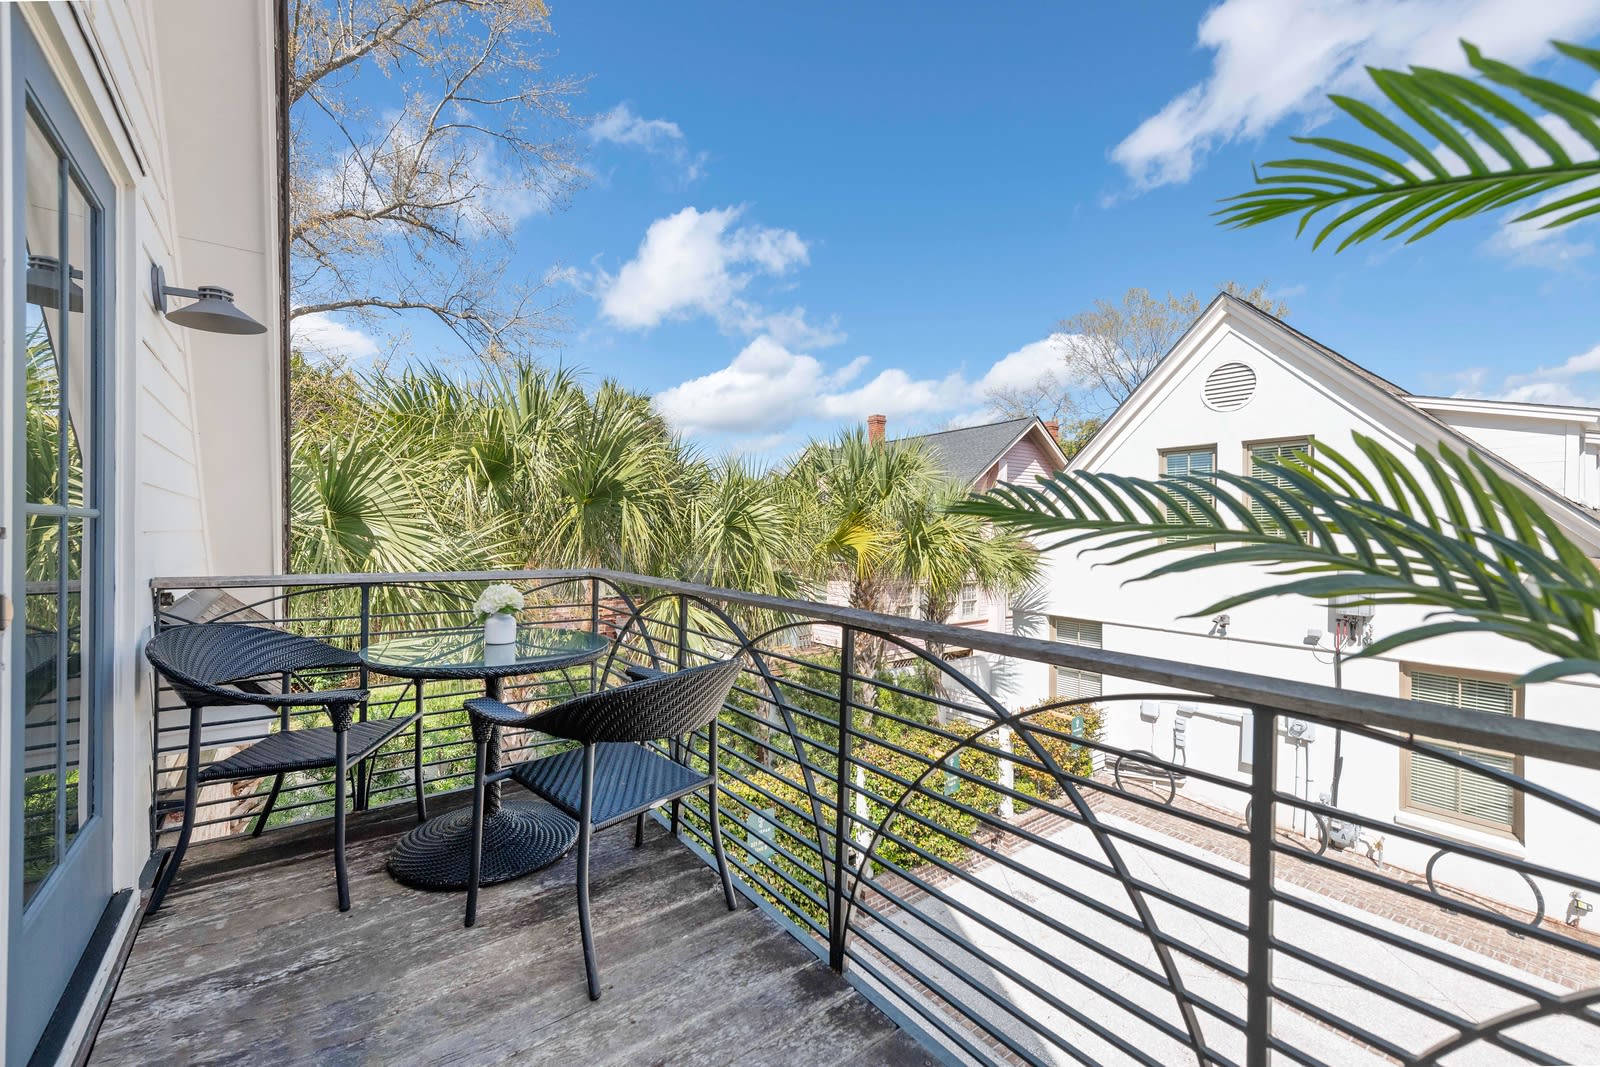 Enjoy the beautiful balcony overlooking the compound!